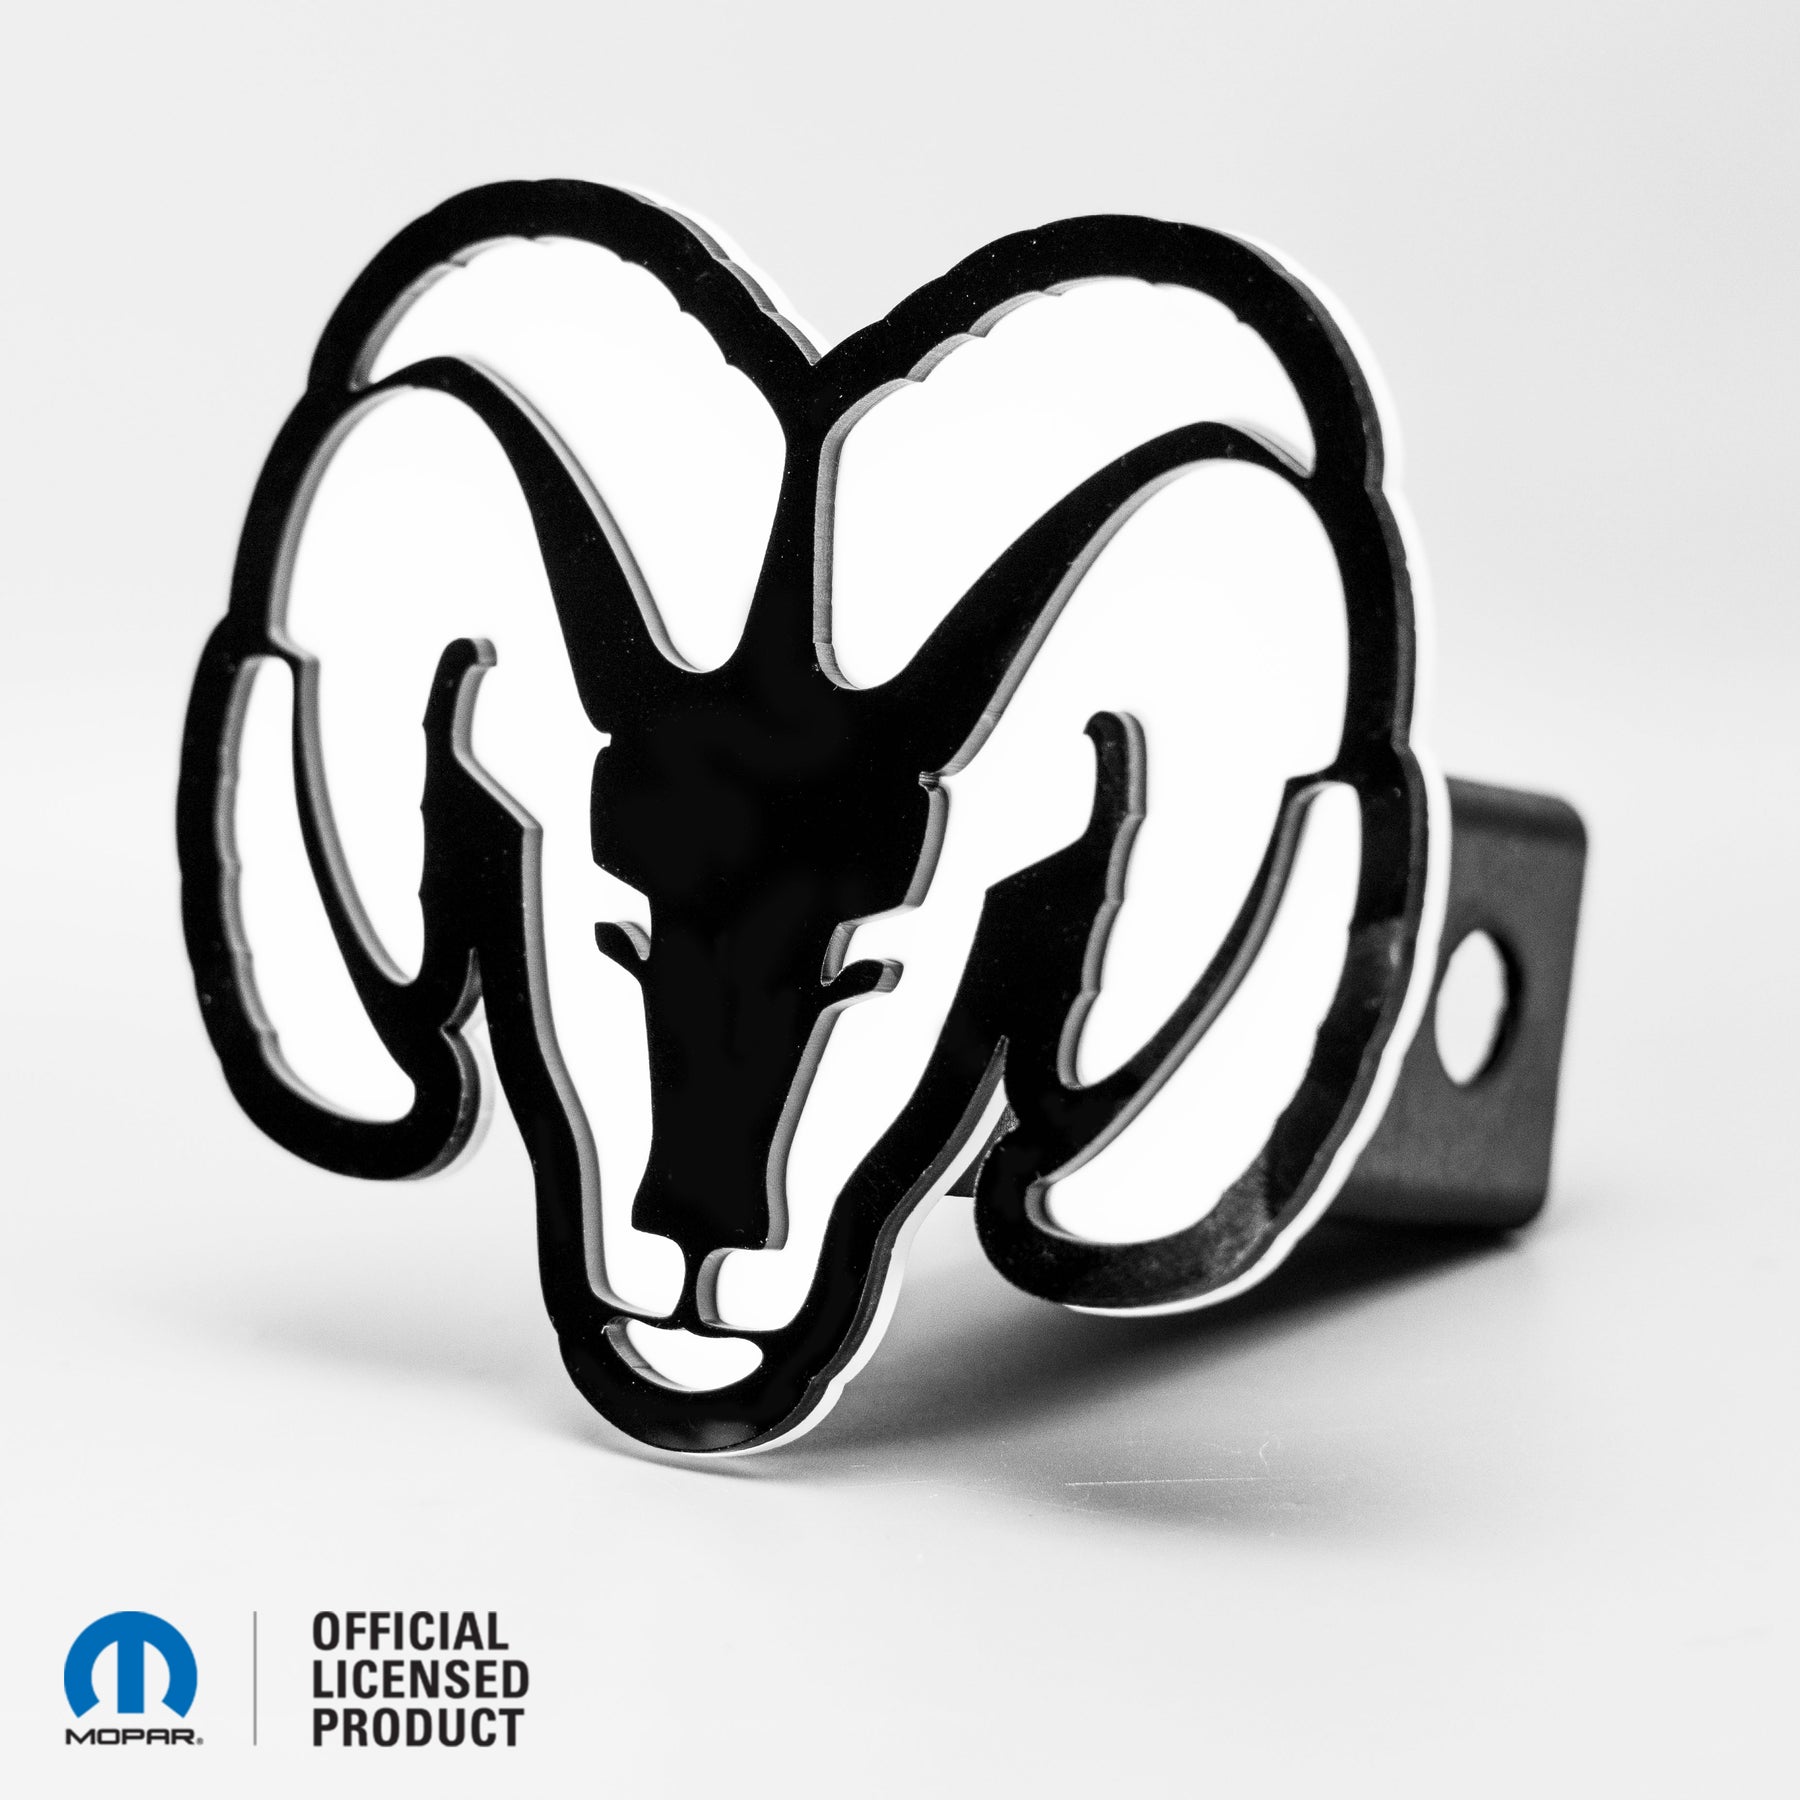 RAM® HEAD LOGO STYLE 2 - HITCH COVER - Gloss on White - Officially Licensed Product